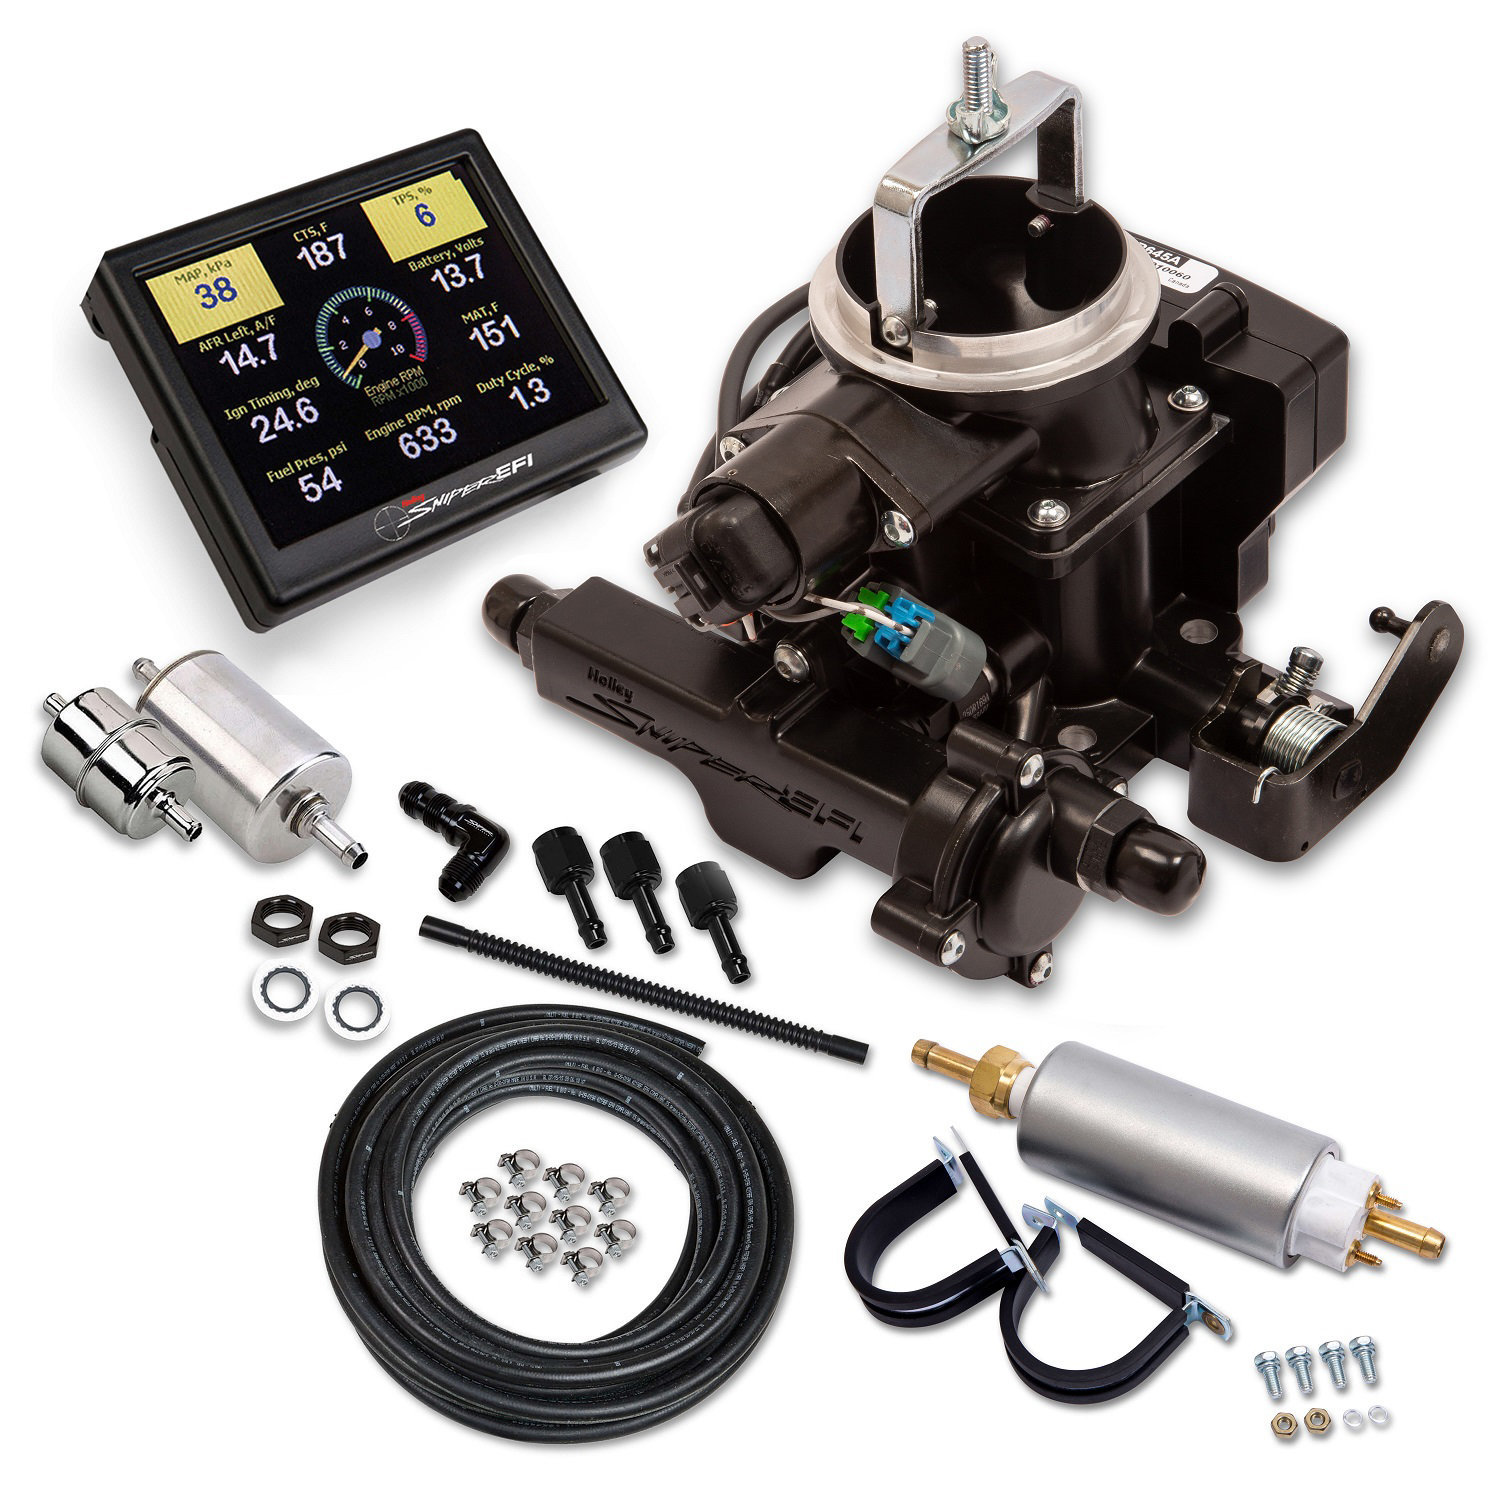 https://www.quadratec.com/sites/default/files/styles/product_zoomed/public/product_images/Holley-550-859K-EFI-BBD-Carburator-Master-Kit-71-86-CJ-with-258-6cyl-Black-Main-Image.jpg